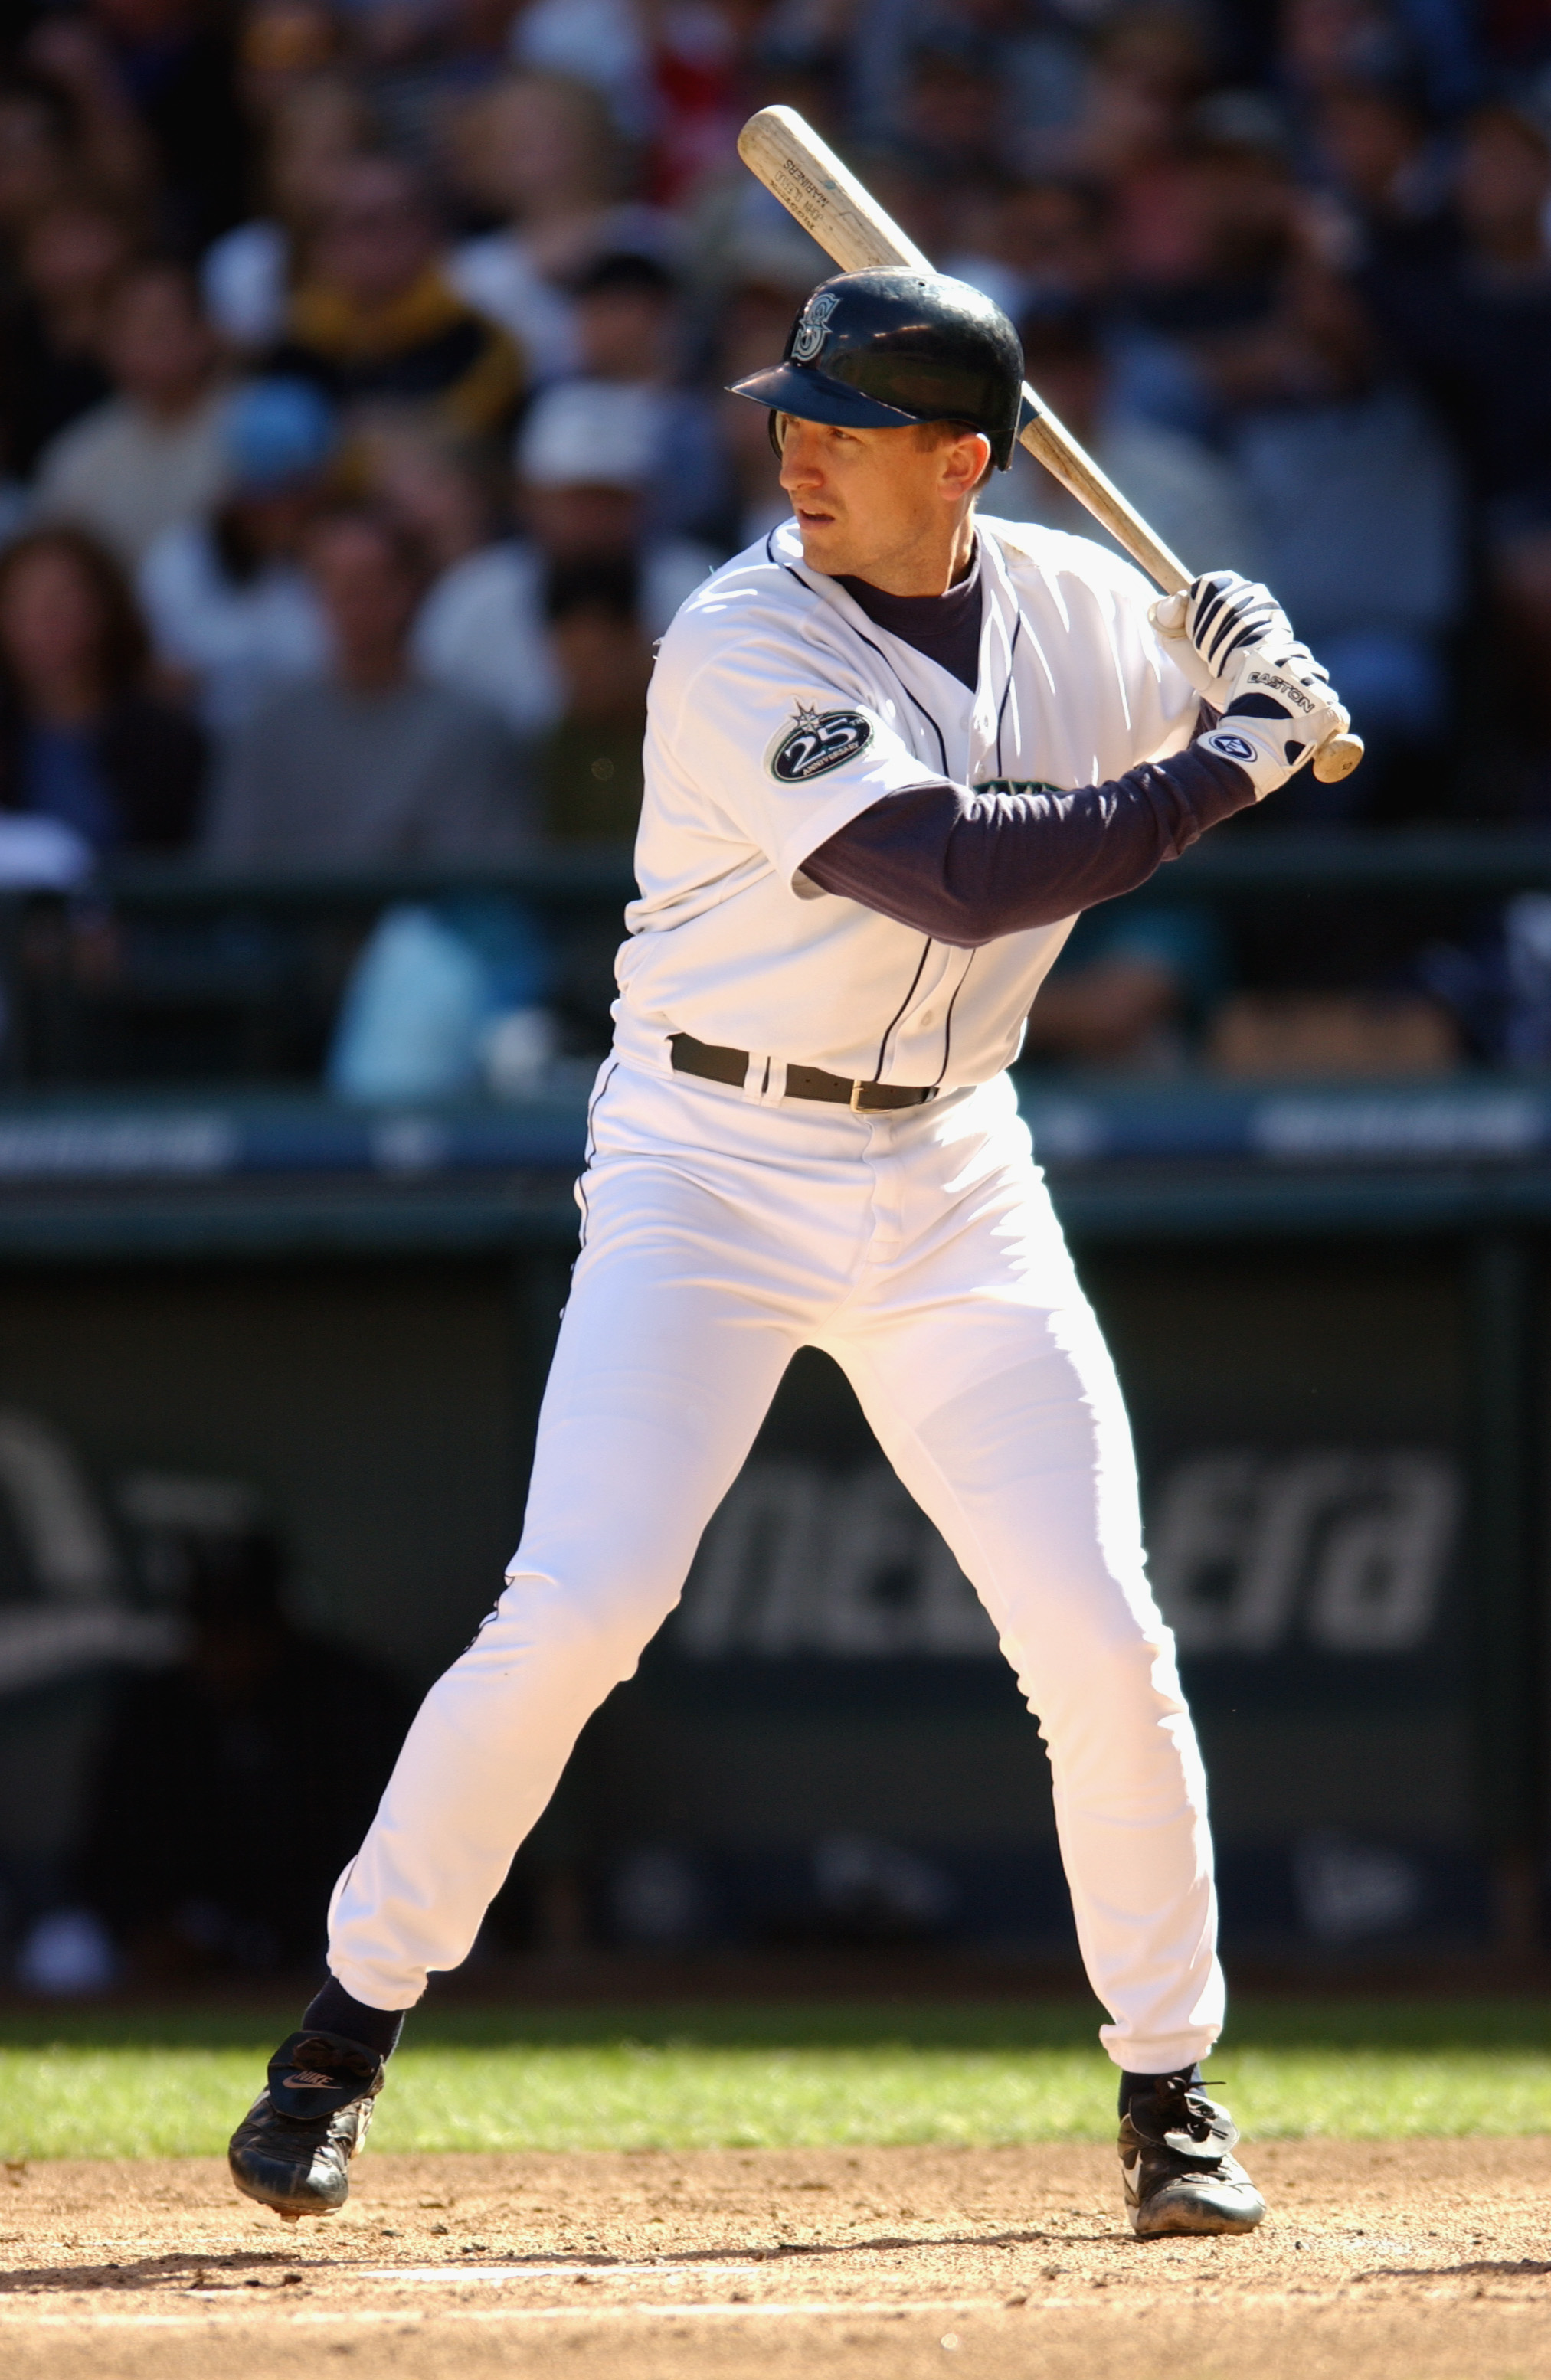 SEATTLE - SEPTEMBER 22:  First Baseman John Olerud #5 of the Seattle Mariners readies at the plate against the Anaheim Angels during the game on September 22, 2002 at Safeco Field in Seattle, Washington.  The Mariners defeated the Angels 3-2.  (Photo by O